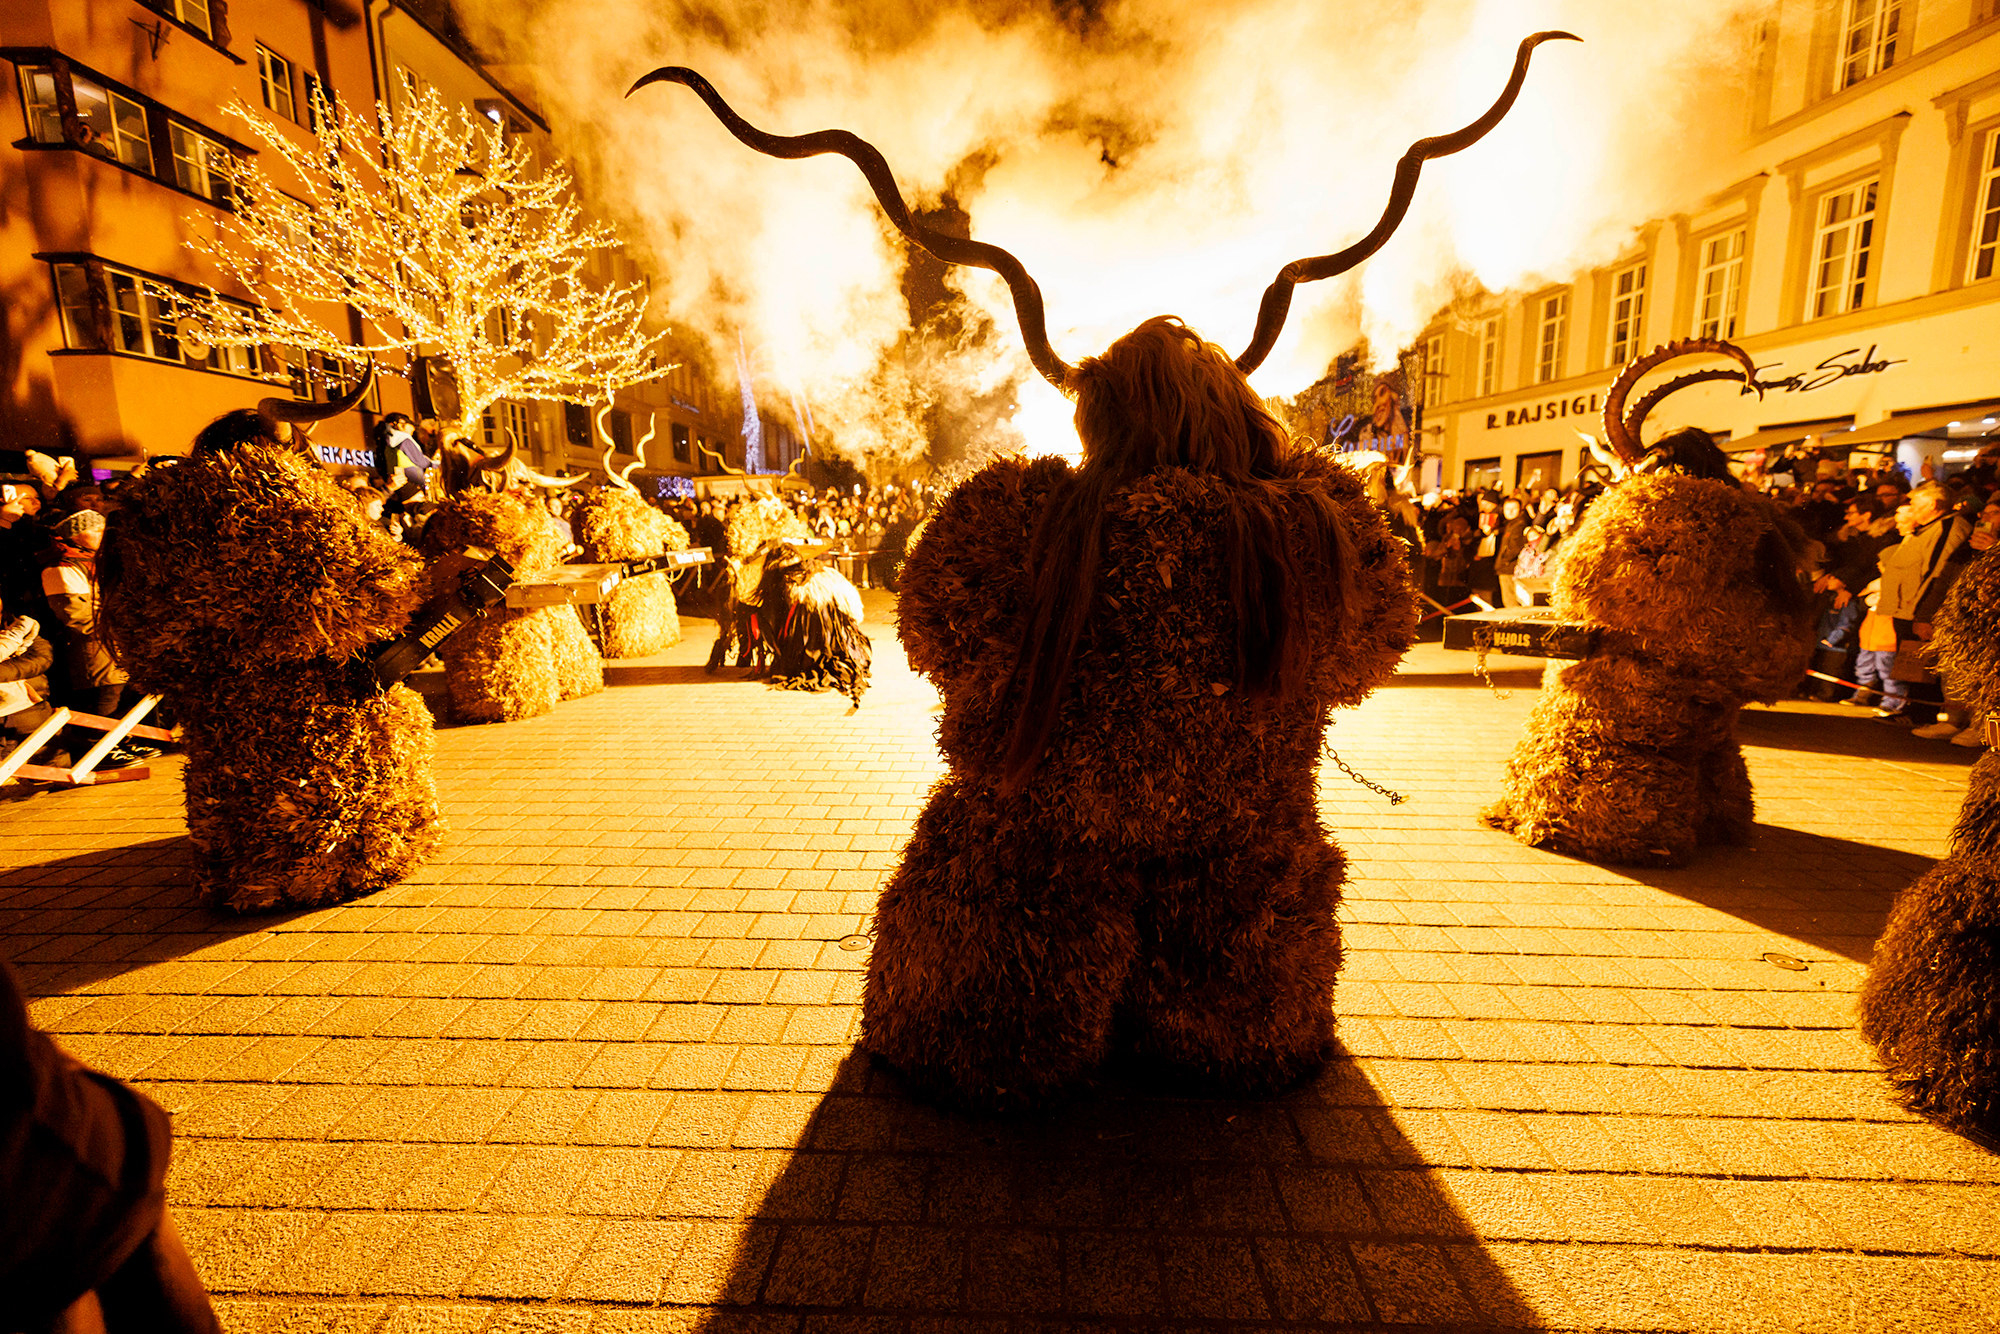 A group of people in heavy robes and long horns look at a yellow smokey fire with their backs turned to the camera